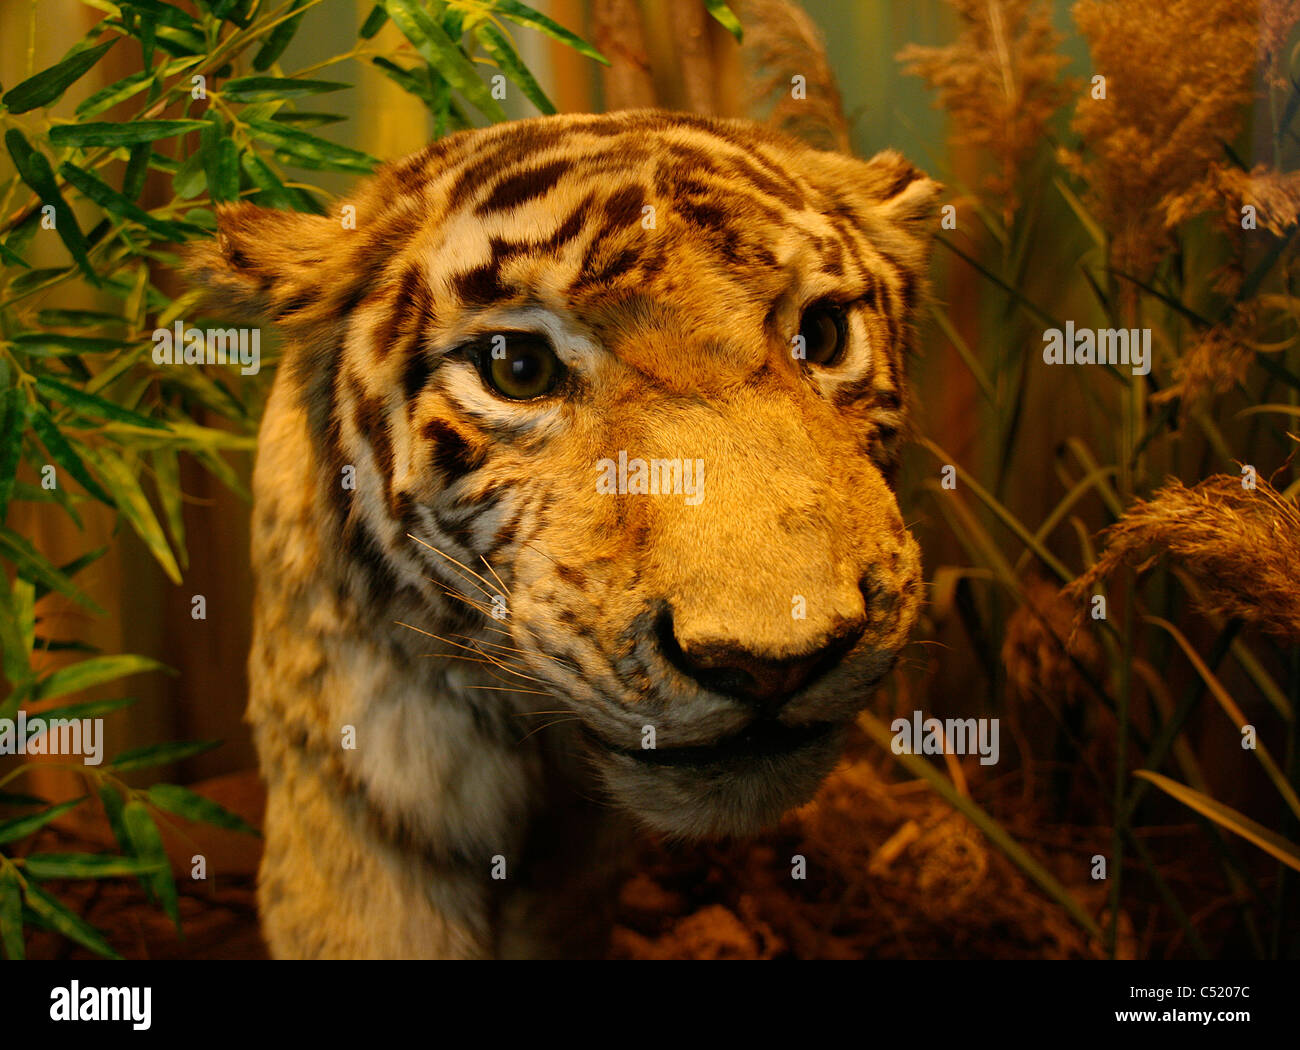 A stuffed / mounted tiger seen in the Natural history museum of Leipzig, Germany. Stock Photo